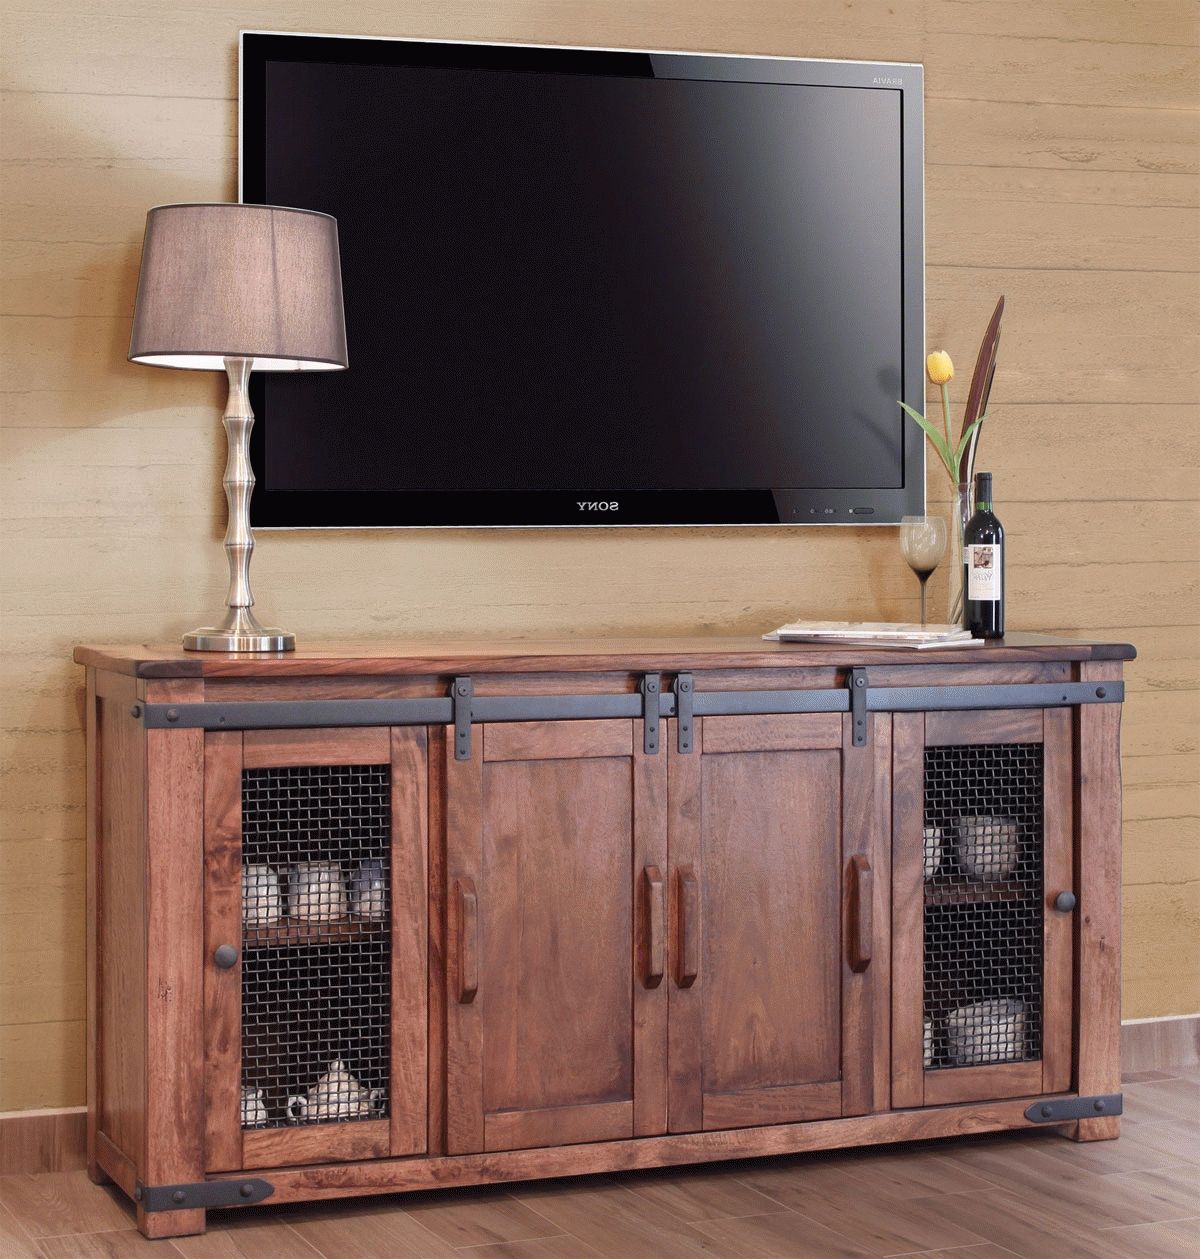 Rustic Tv Stand, Wood Tv Stand, Pine Tv Stand Throughout Pine Tv Cabinets (View 18 of 20)